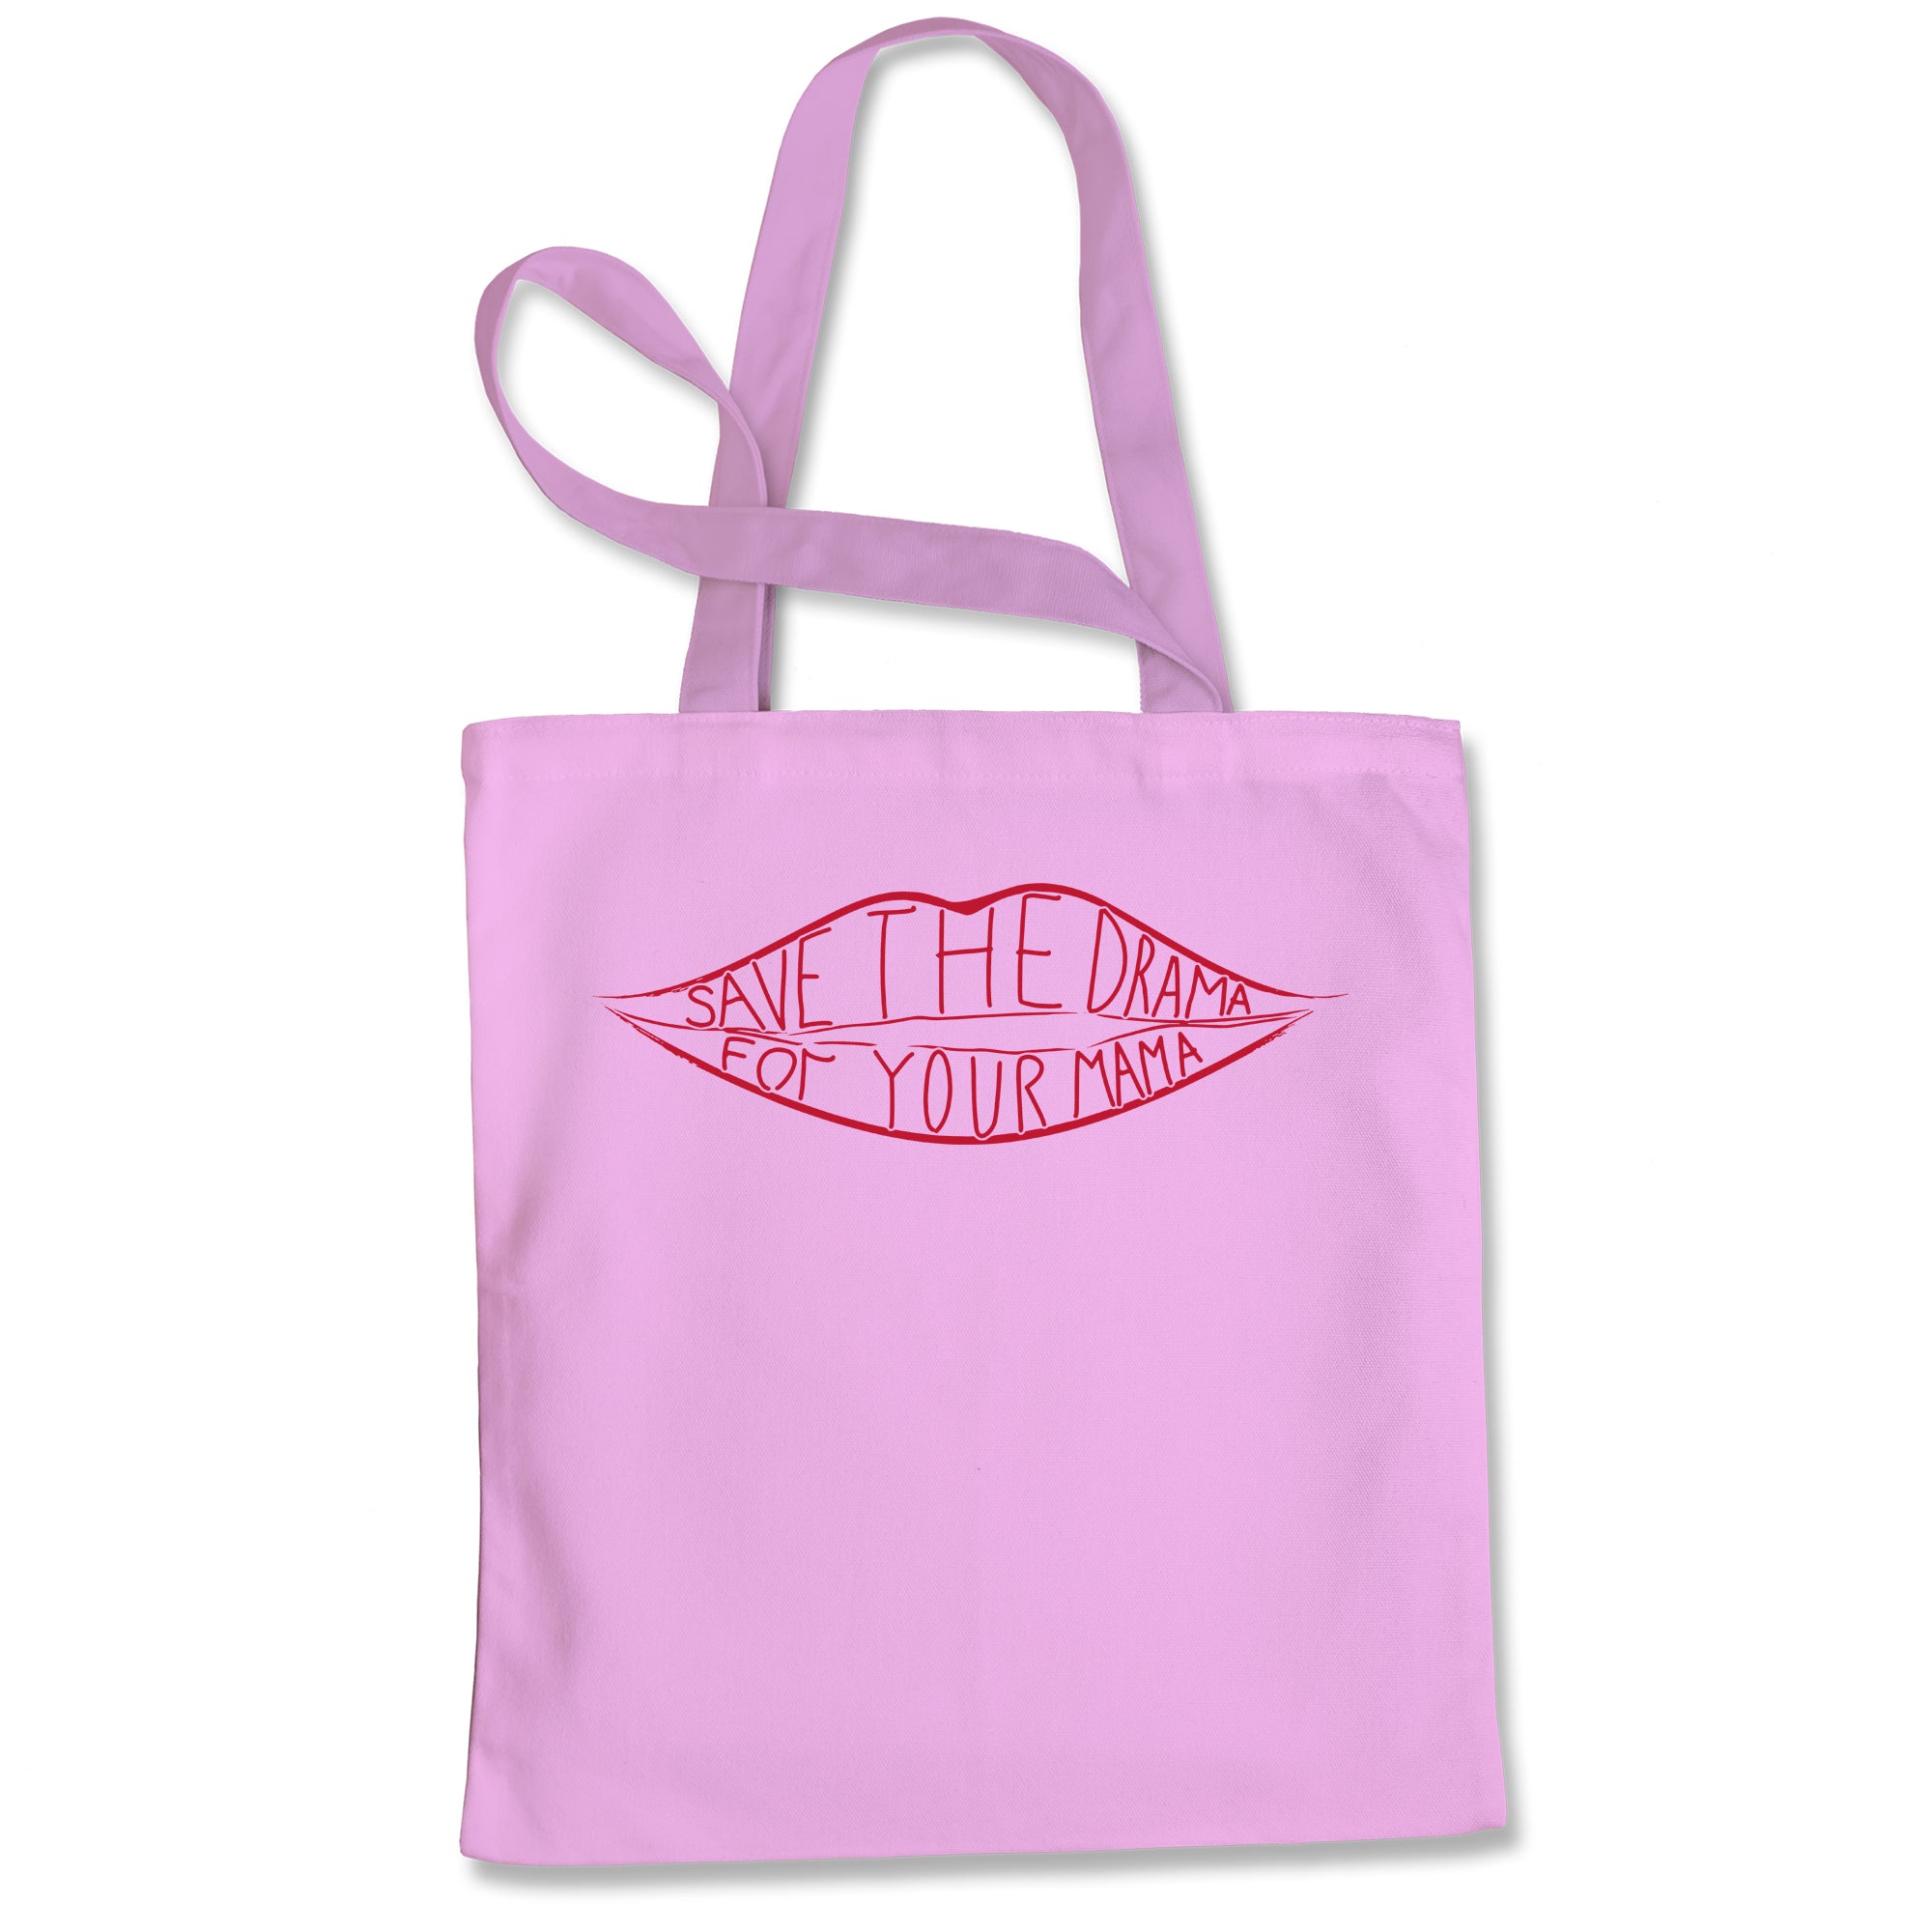 Save The Drama For Your Mama Tote Bag